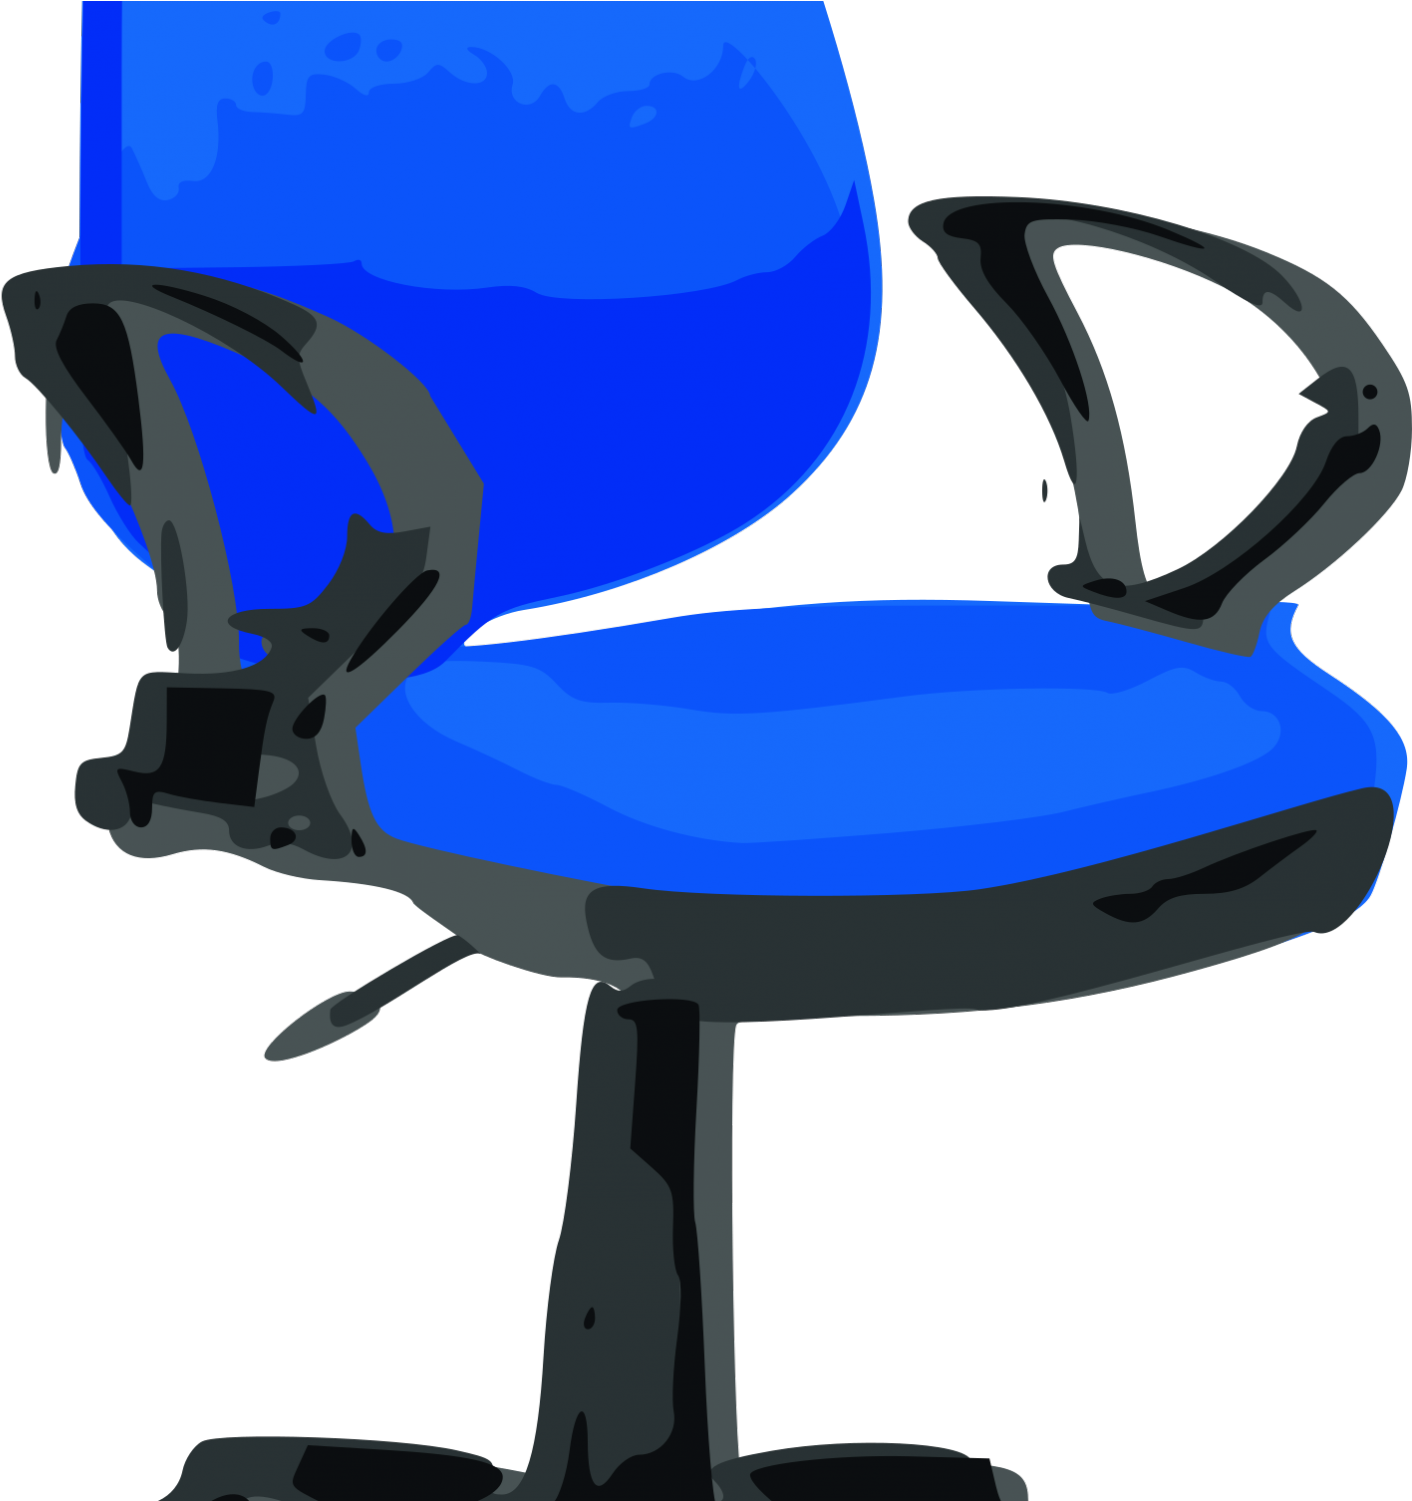 Table Office & Desk Chairs Clip Art - Table Office & Desk Chairs Clip Art (1500x1500)